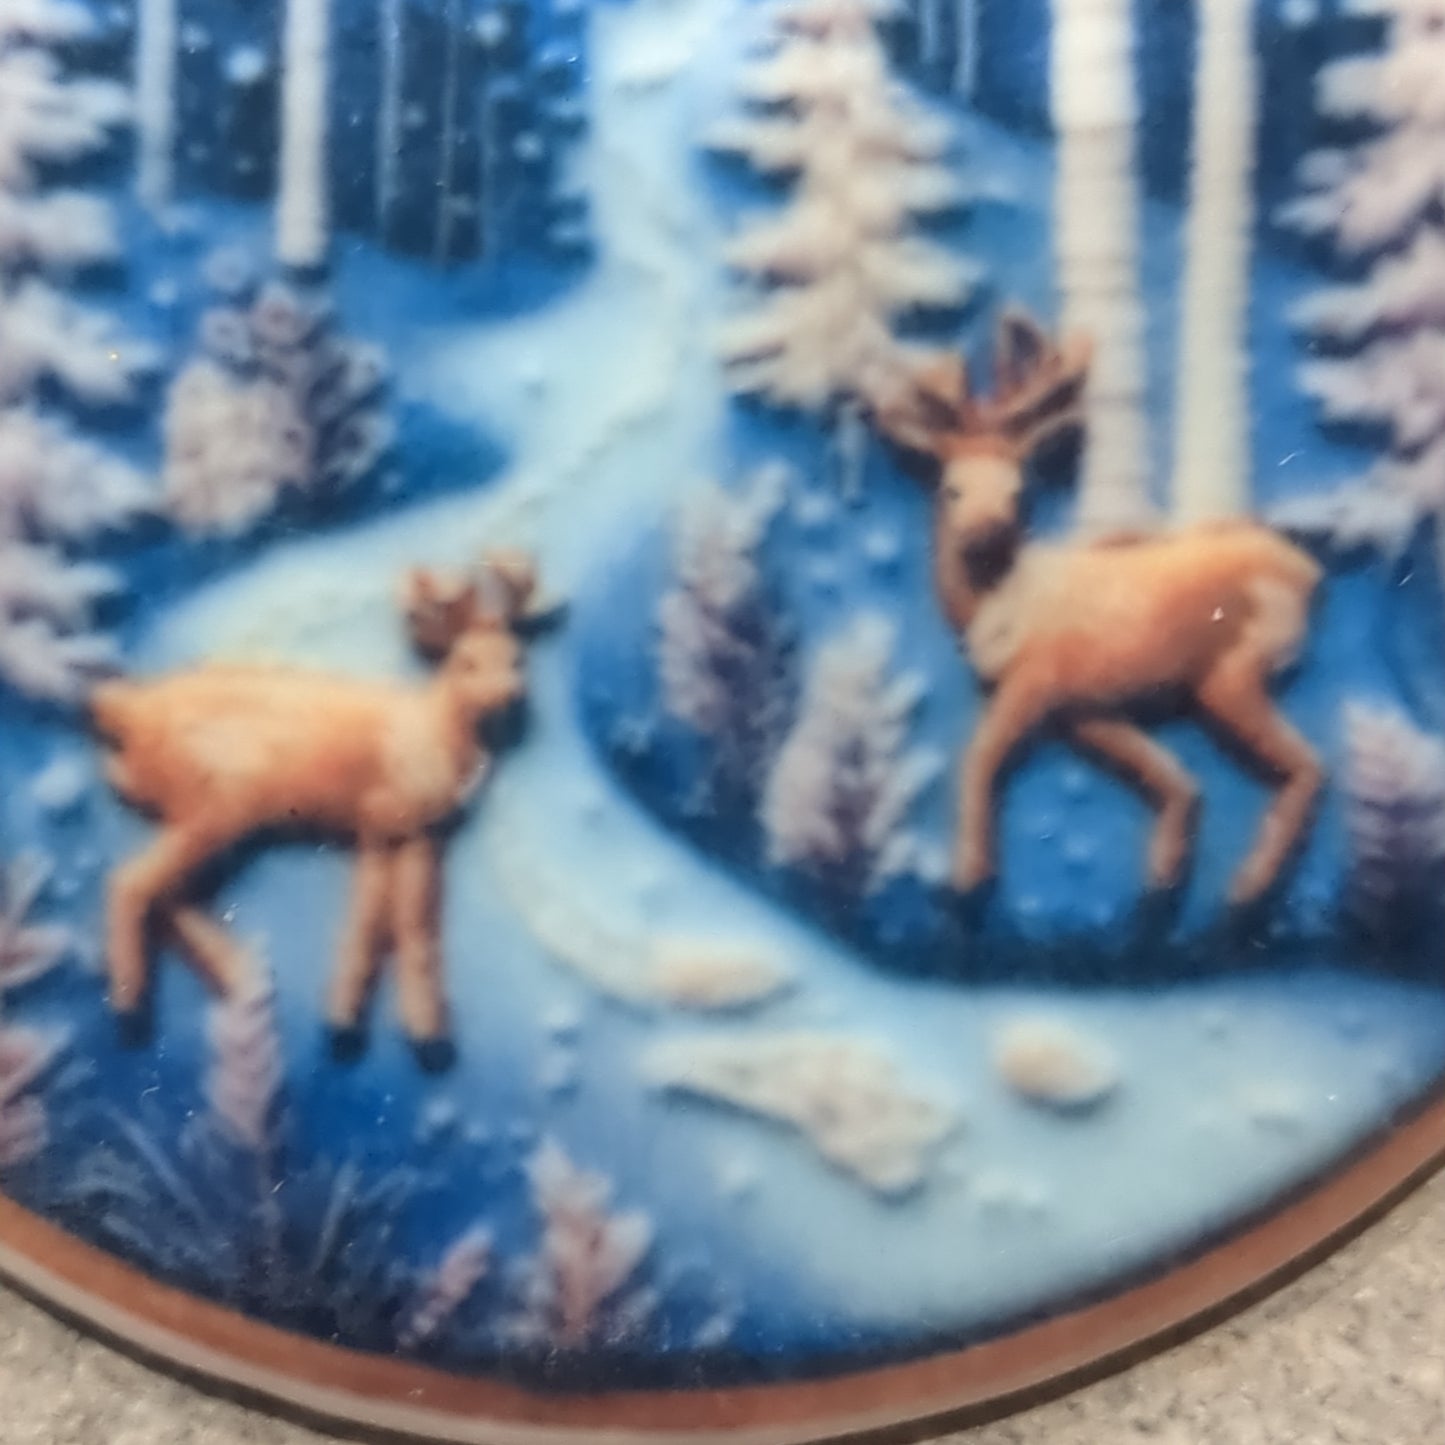 Ceramic ornament with a pair of deer by a river in the forest, it appears 3D but it is not